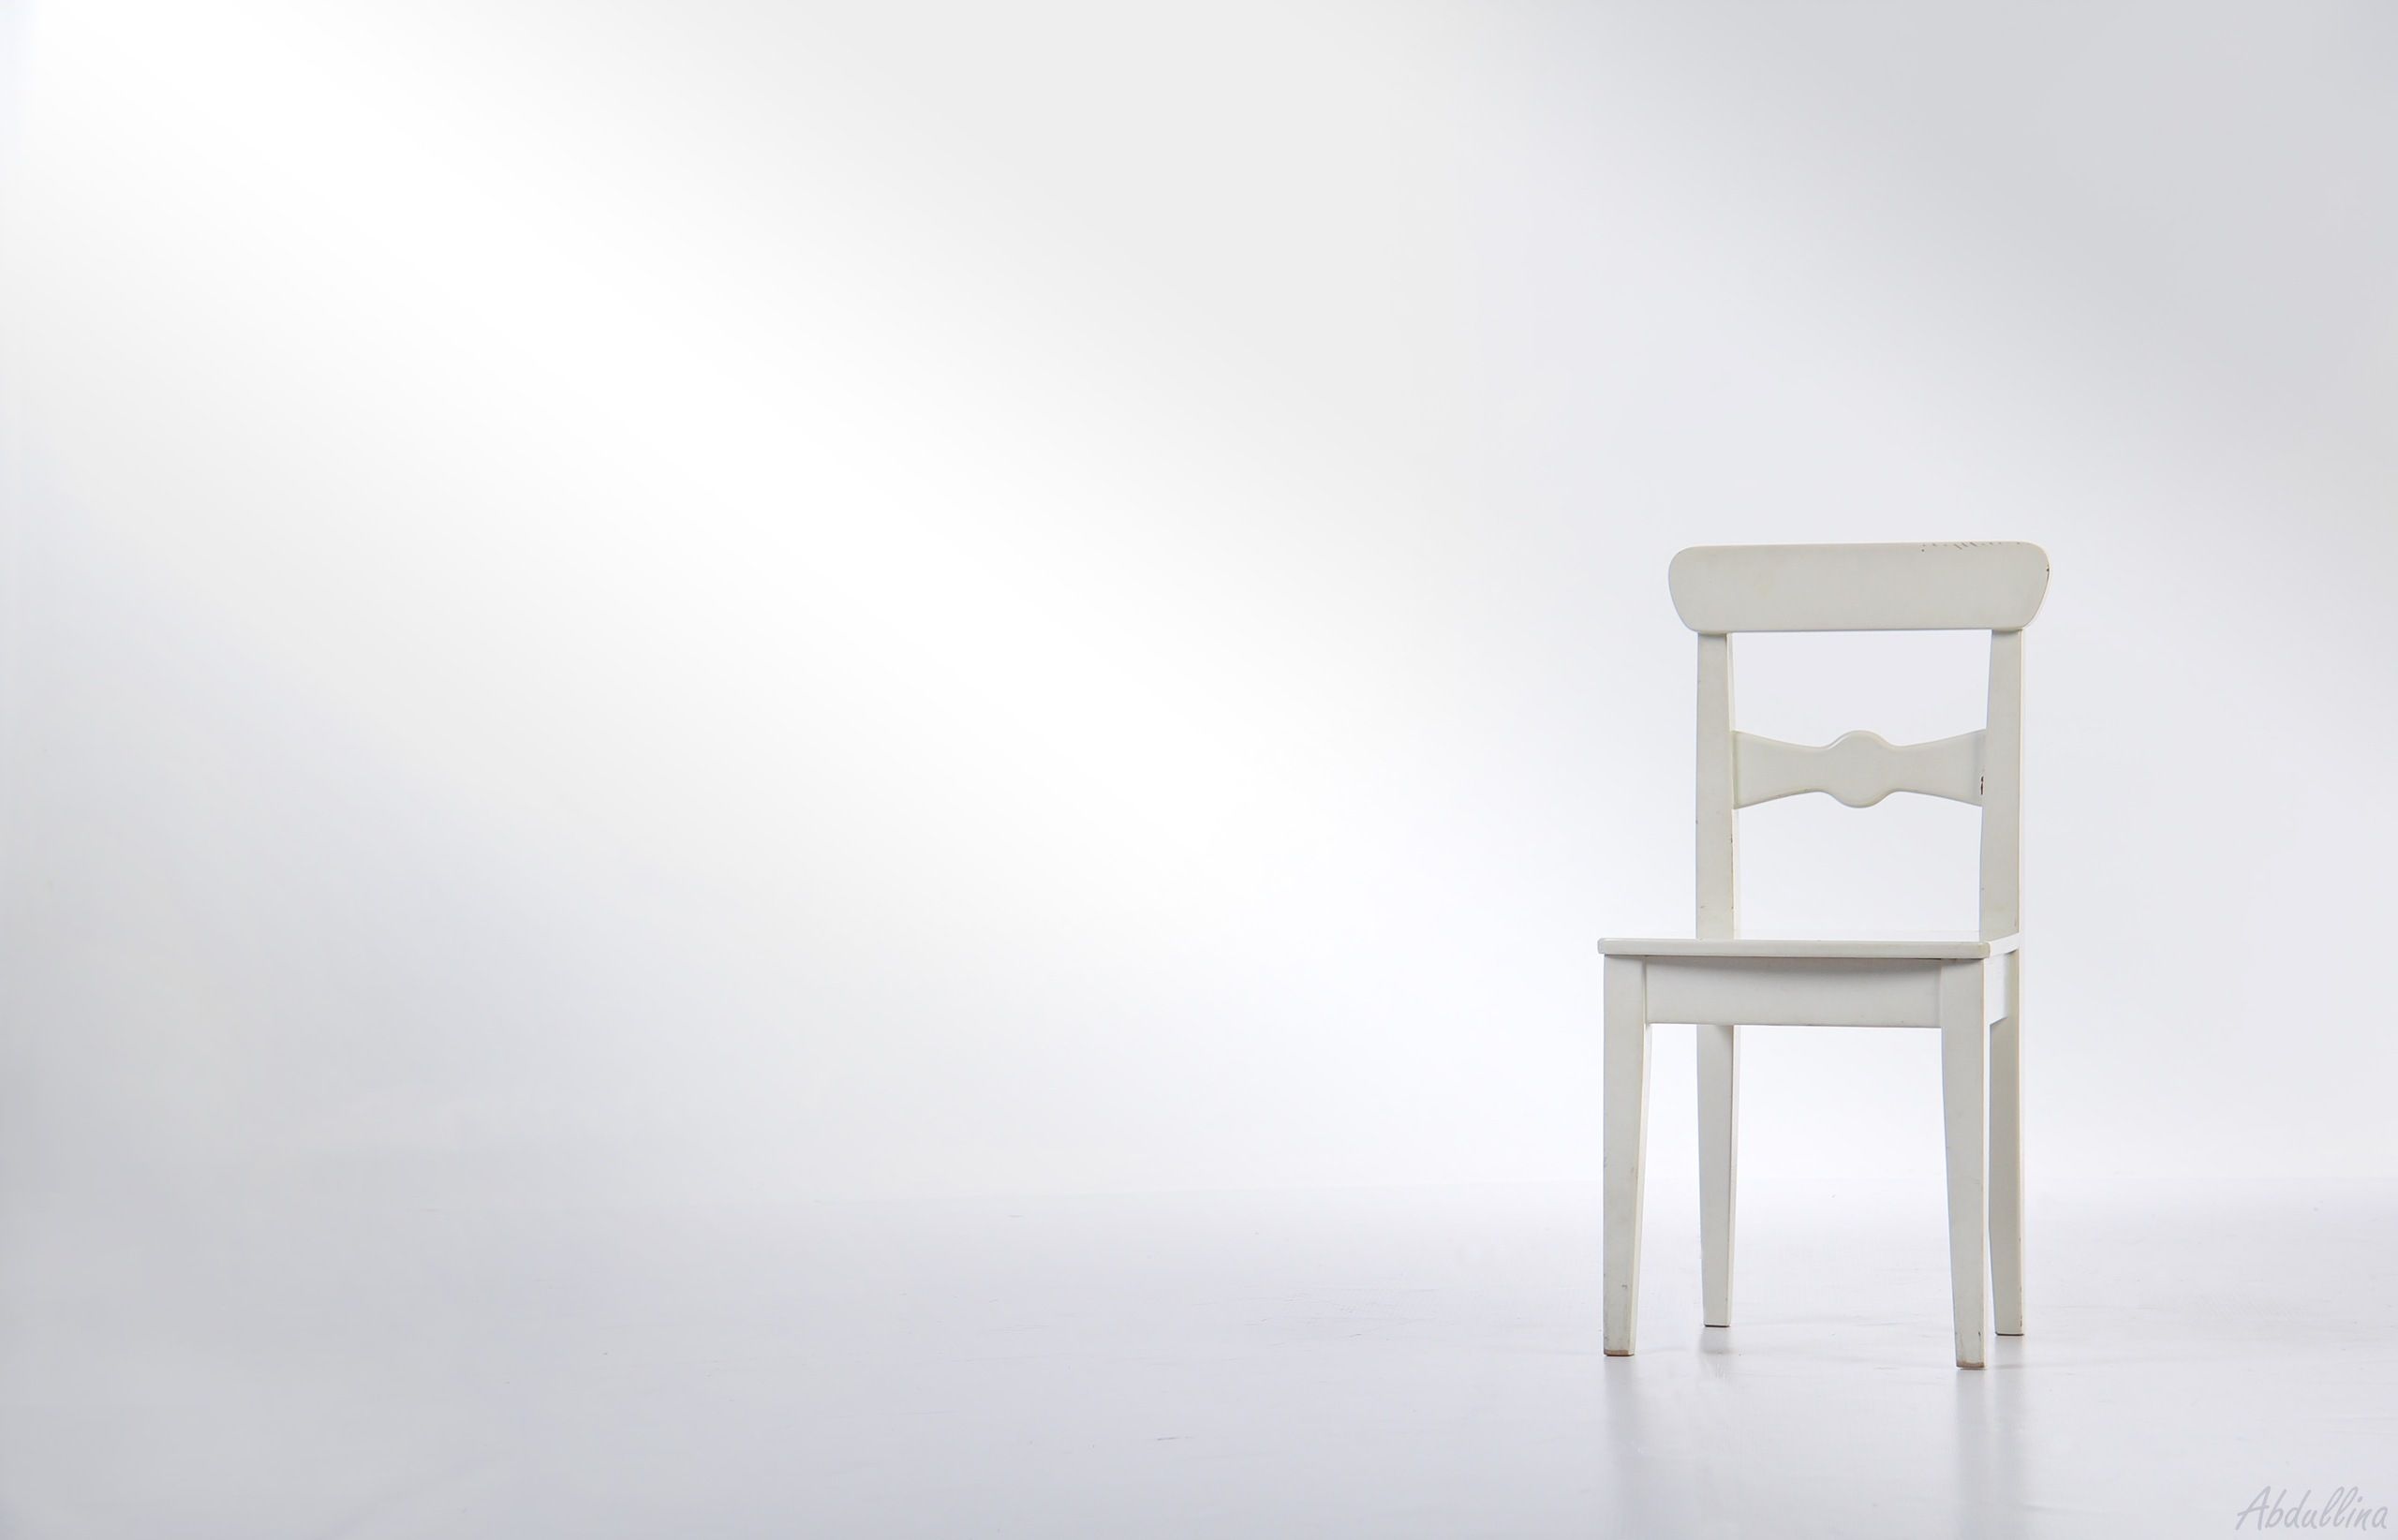 Chair In White Room - HD Wallpaper 